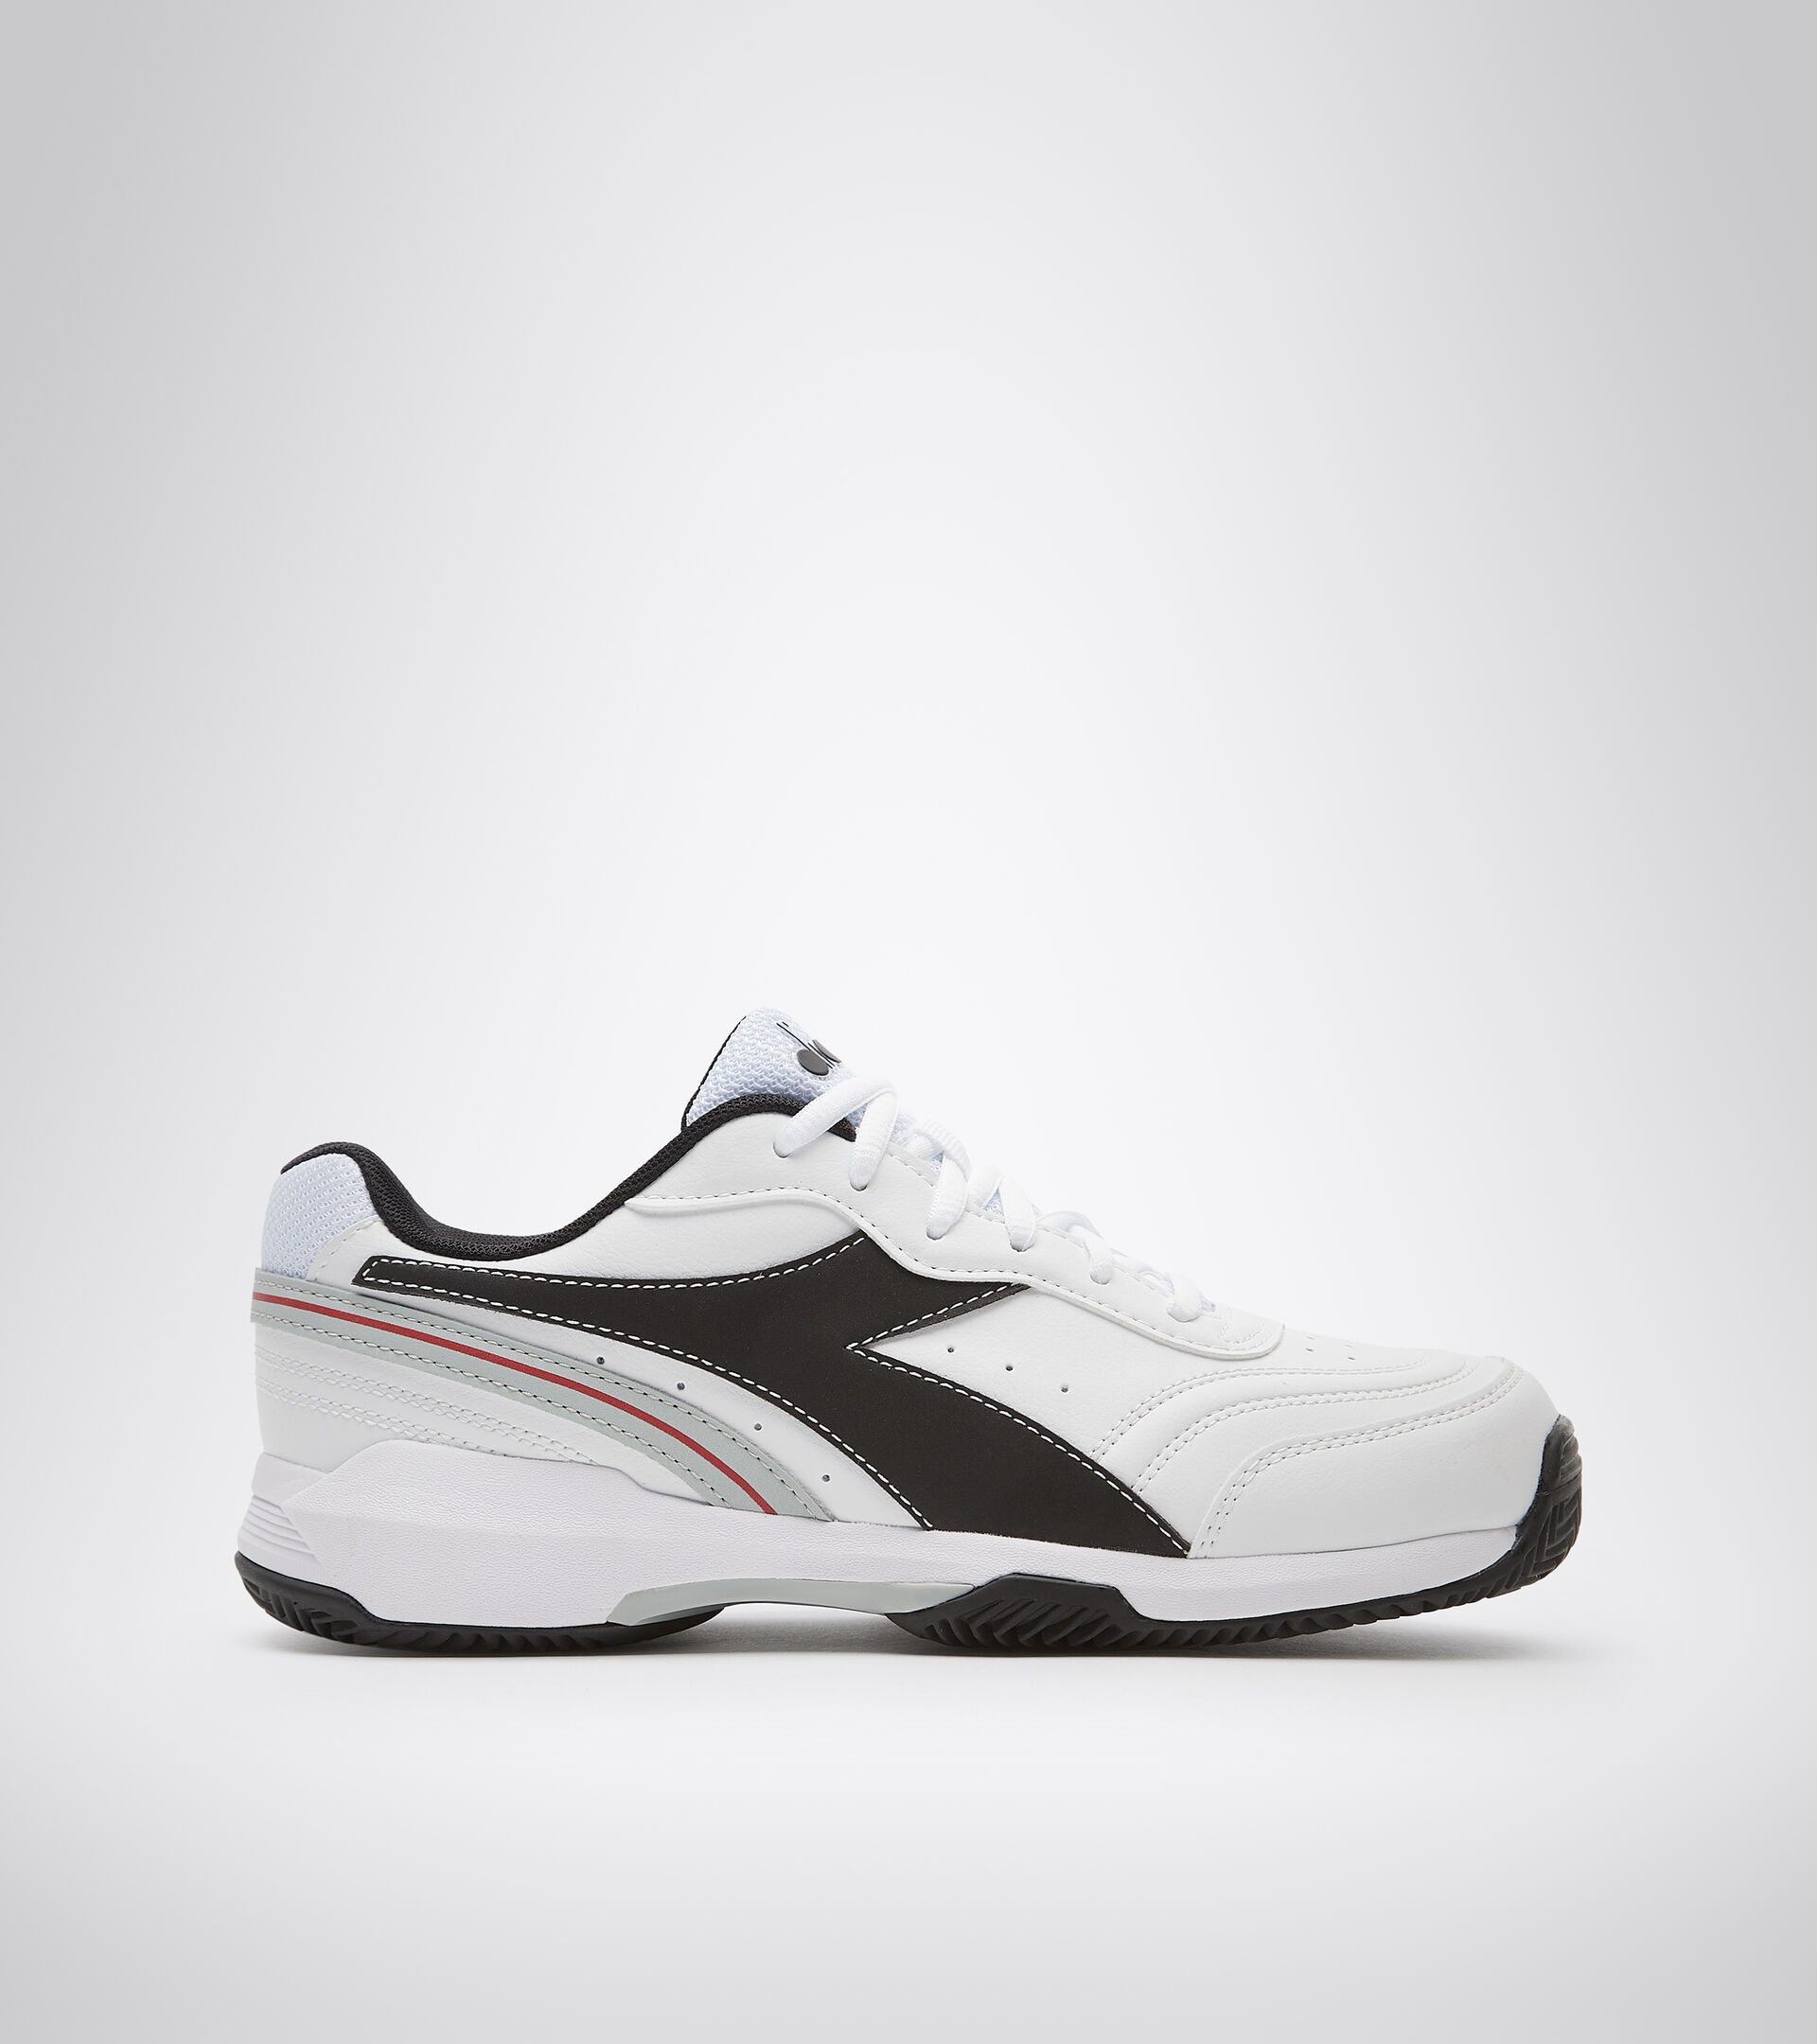 Tennis shoes for clay courts - Men S.CHALLENGE 4 SL CLAY WHITE/BLACK - Diadora